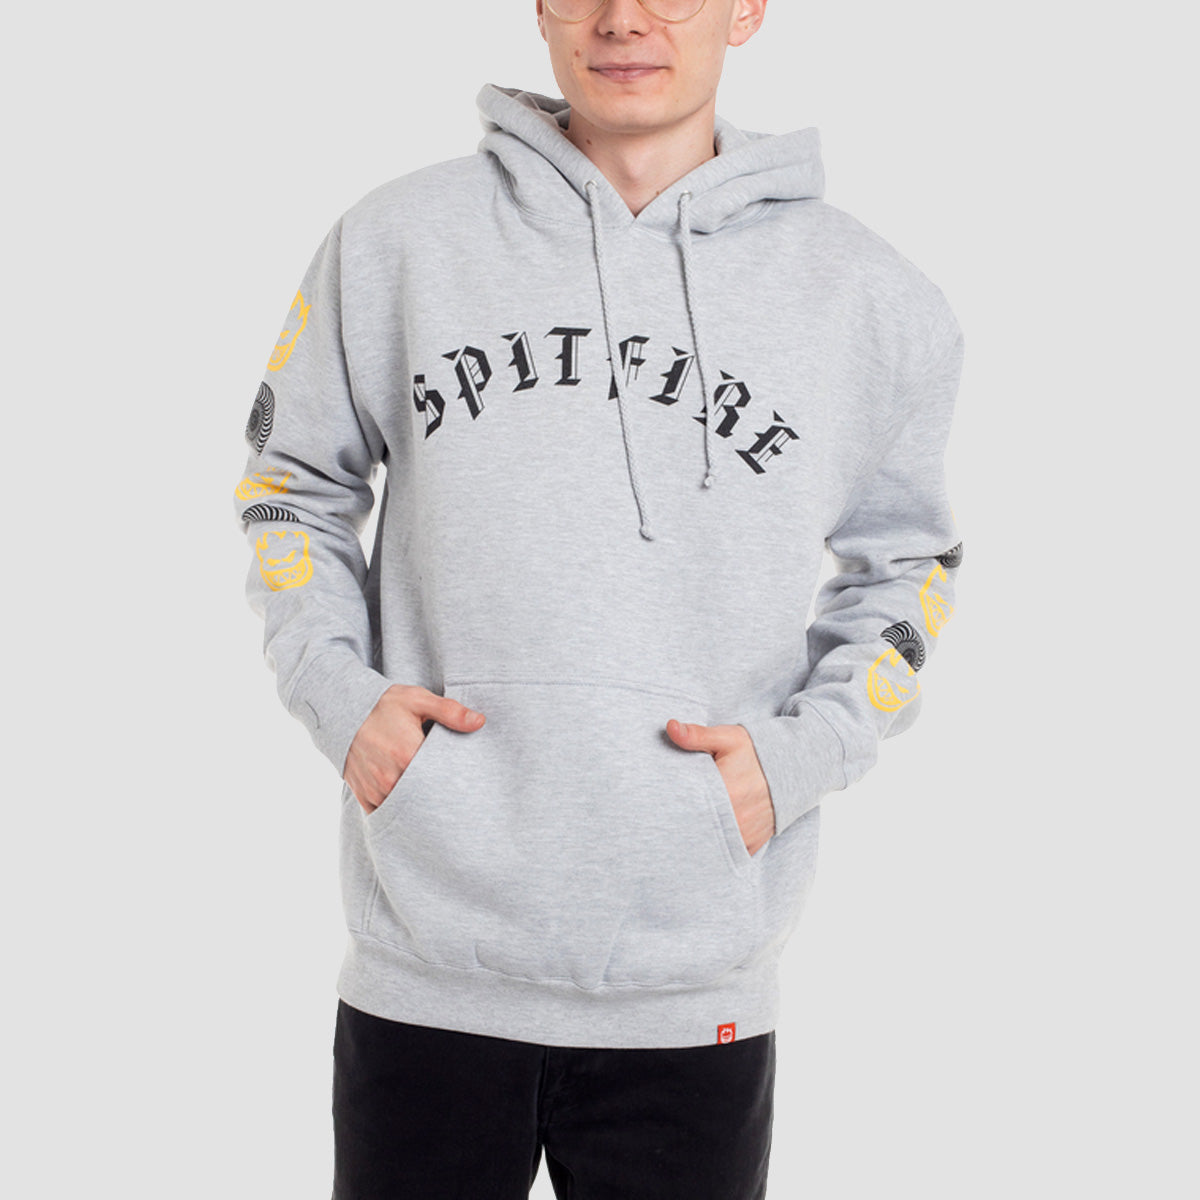 Spitfire Old E Combo Sleeve Pullover Hoodie Grey Heather/Black/Yellow